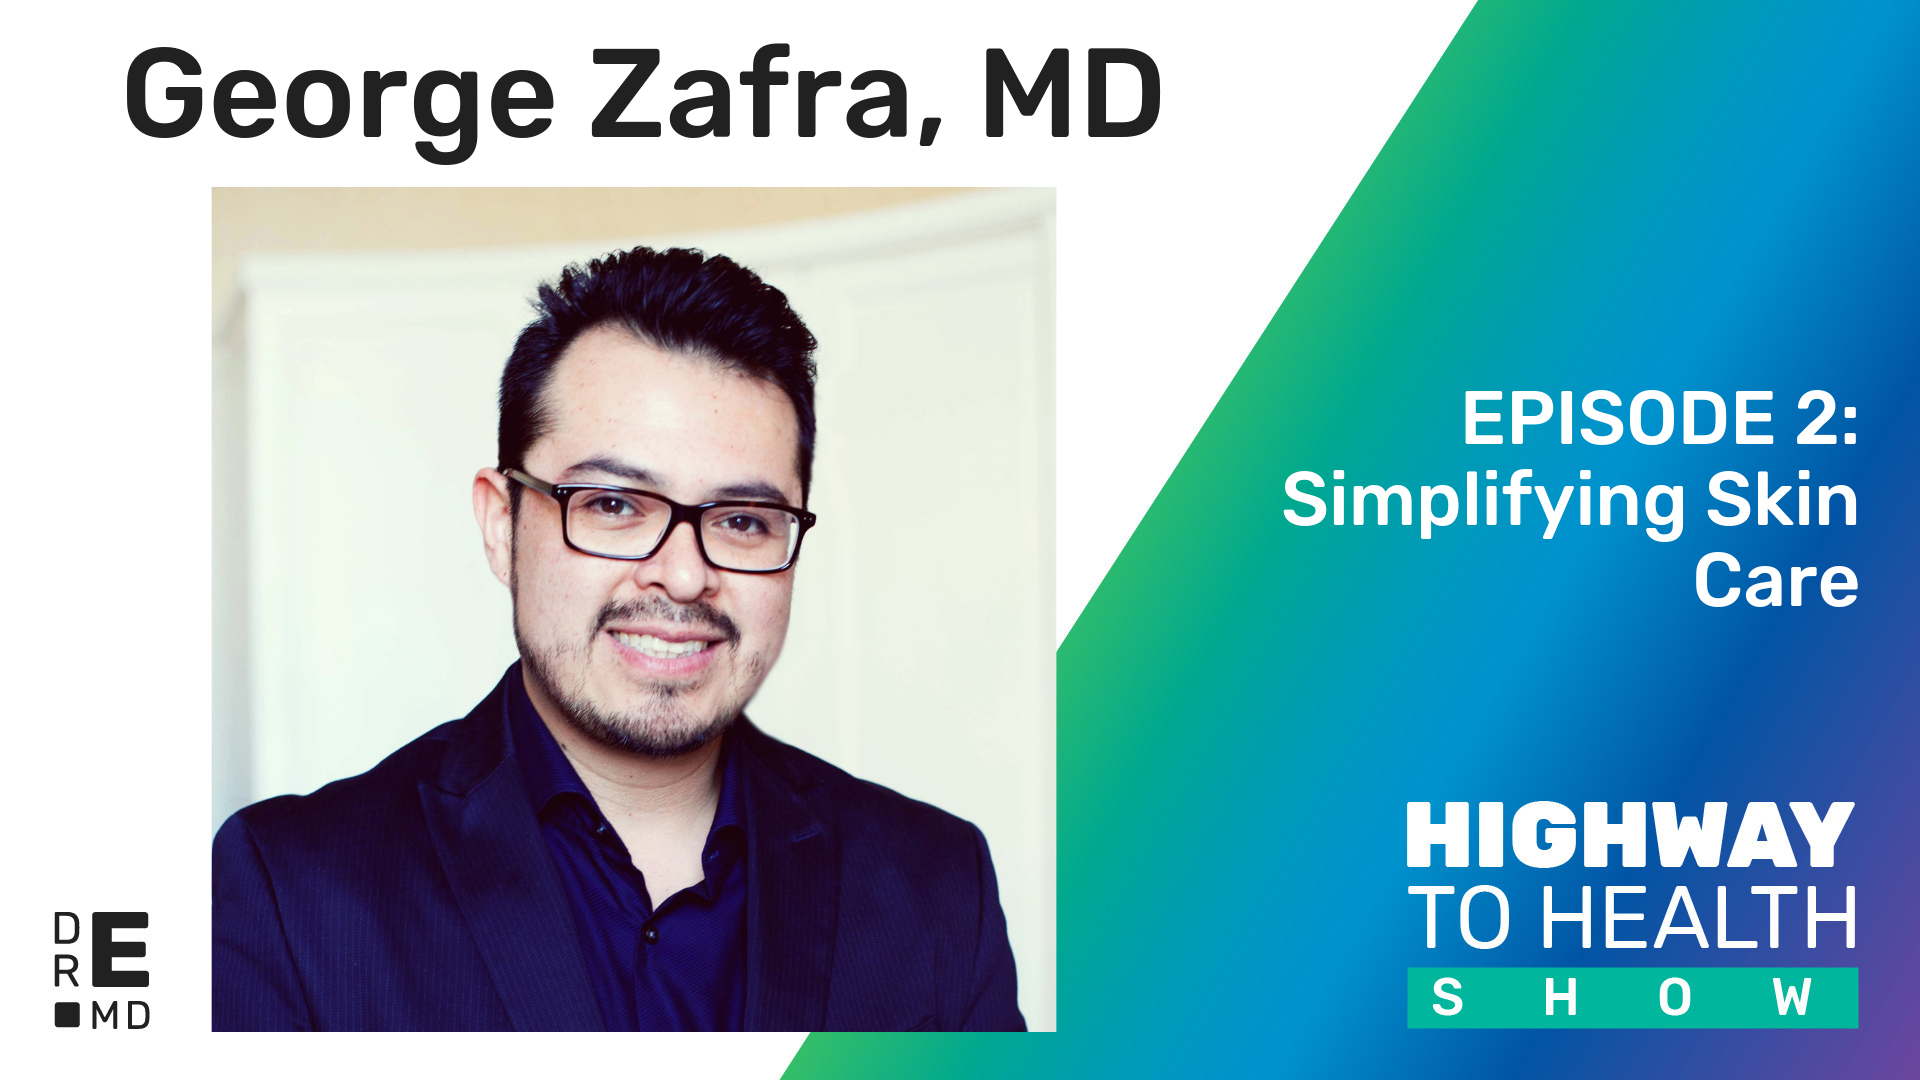 Highway to Health: Ep 02 - Dr George Zafra MD